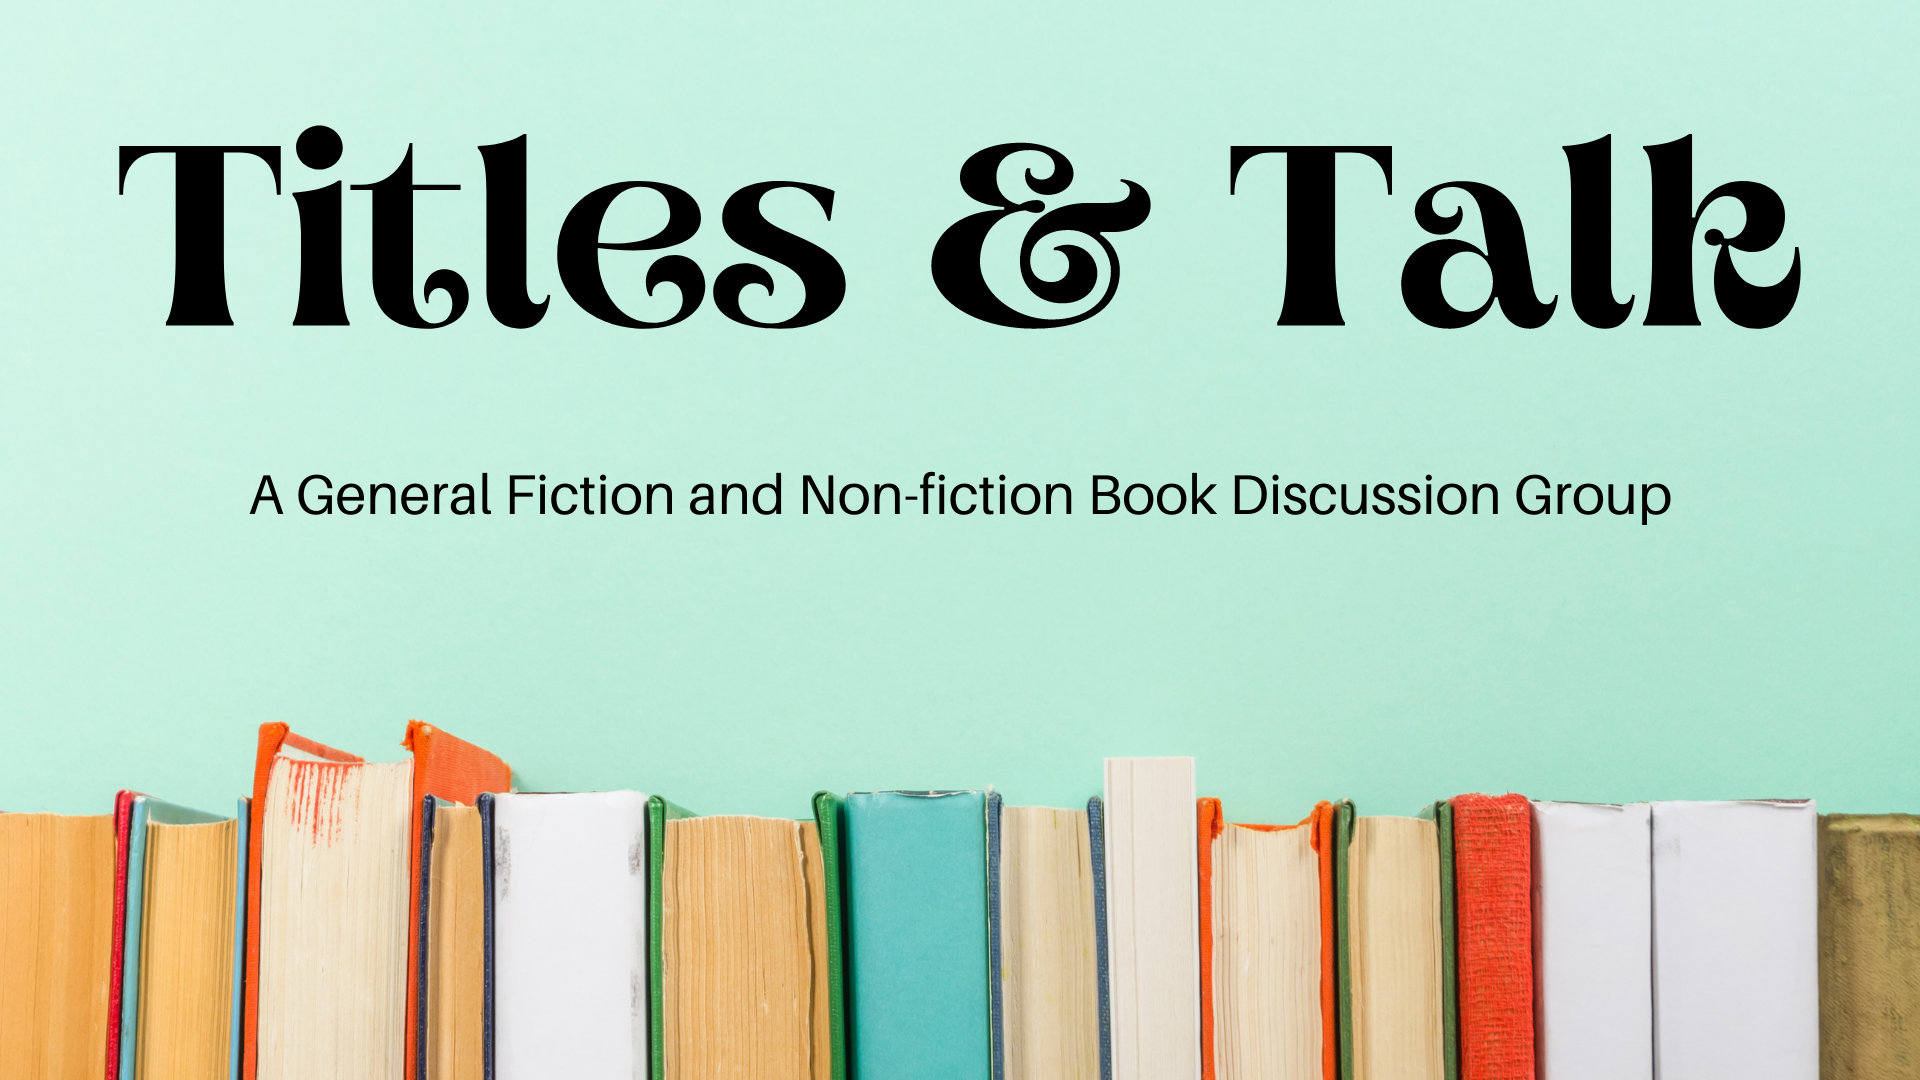 Titles & Talk Book Discussion Group